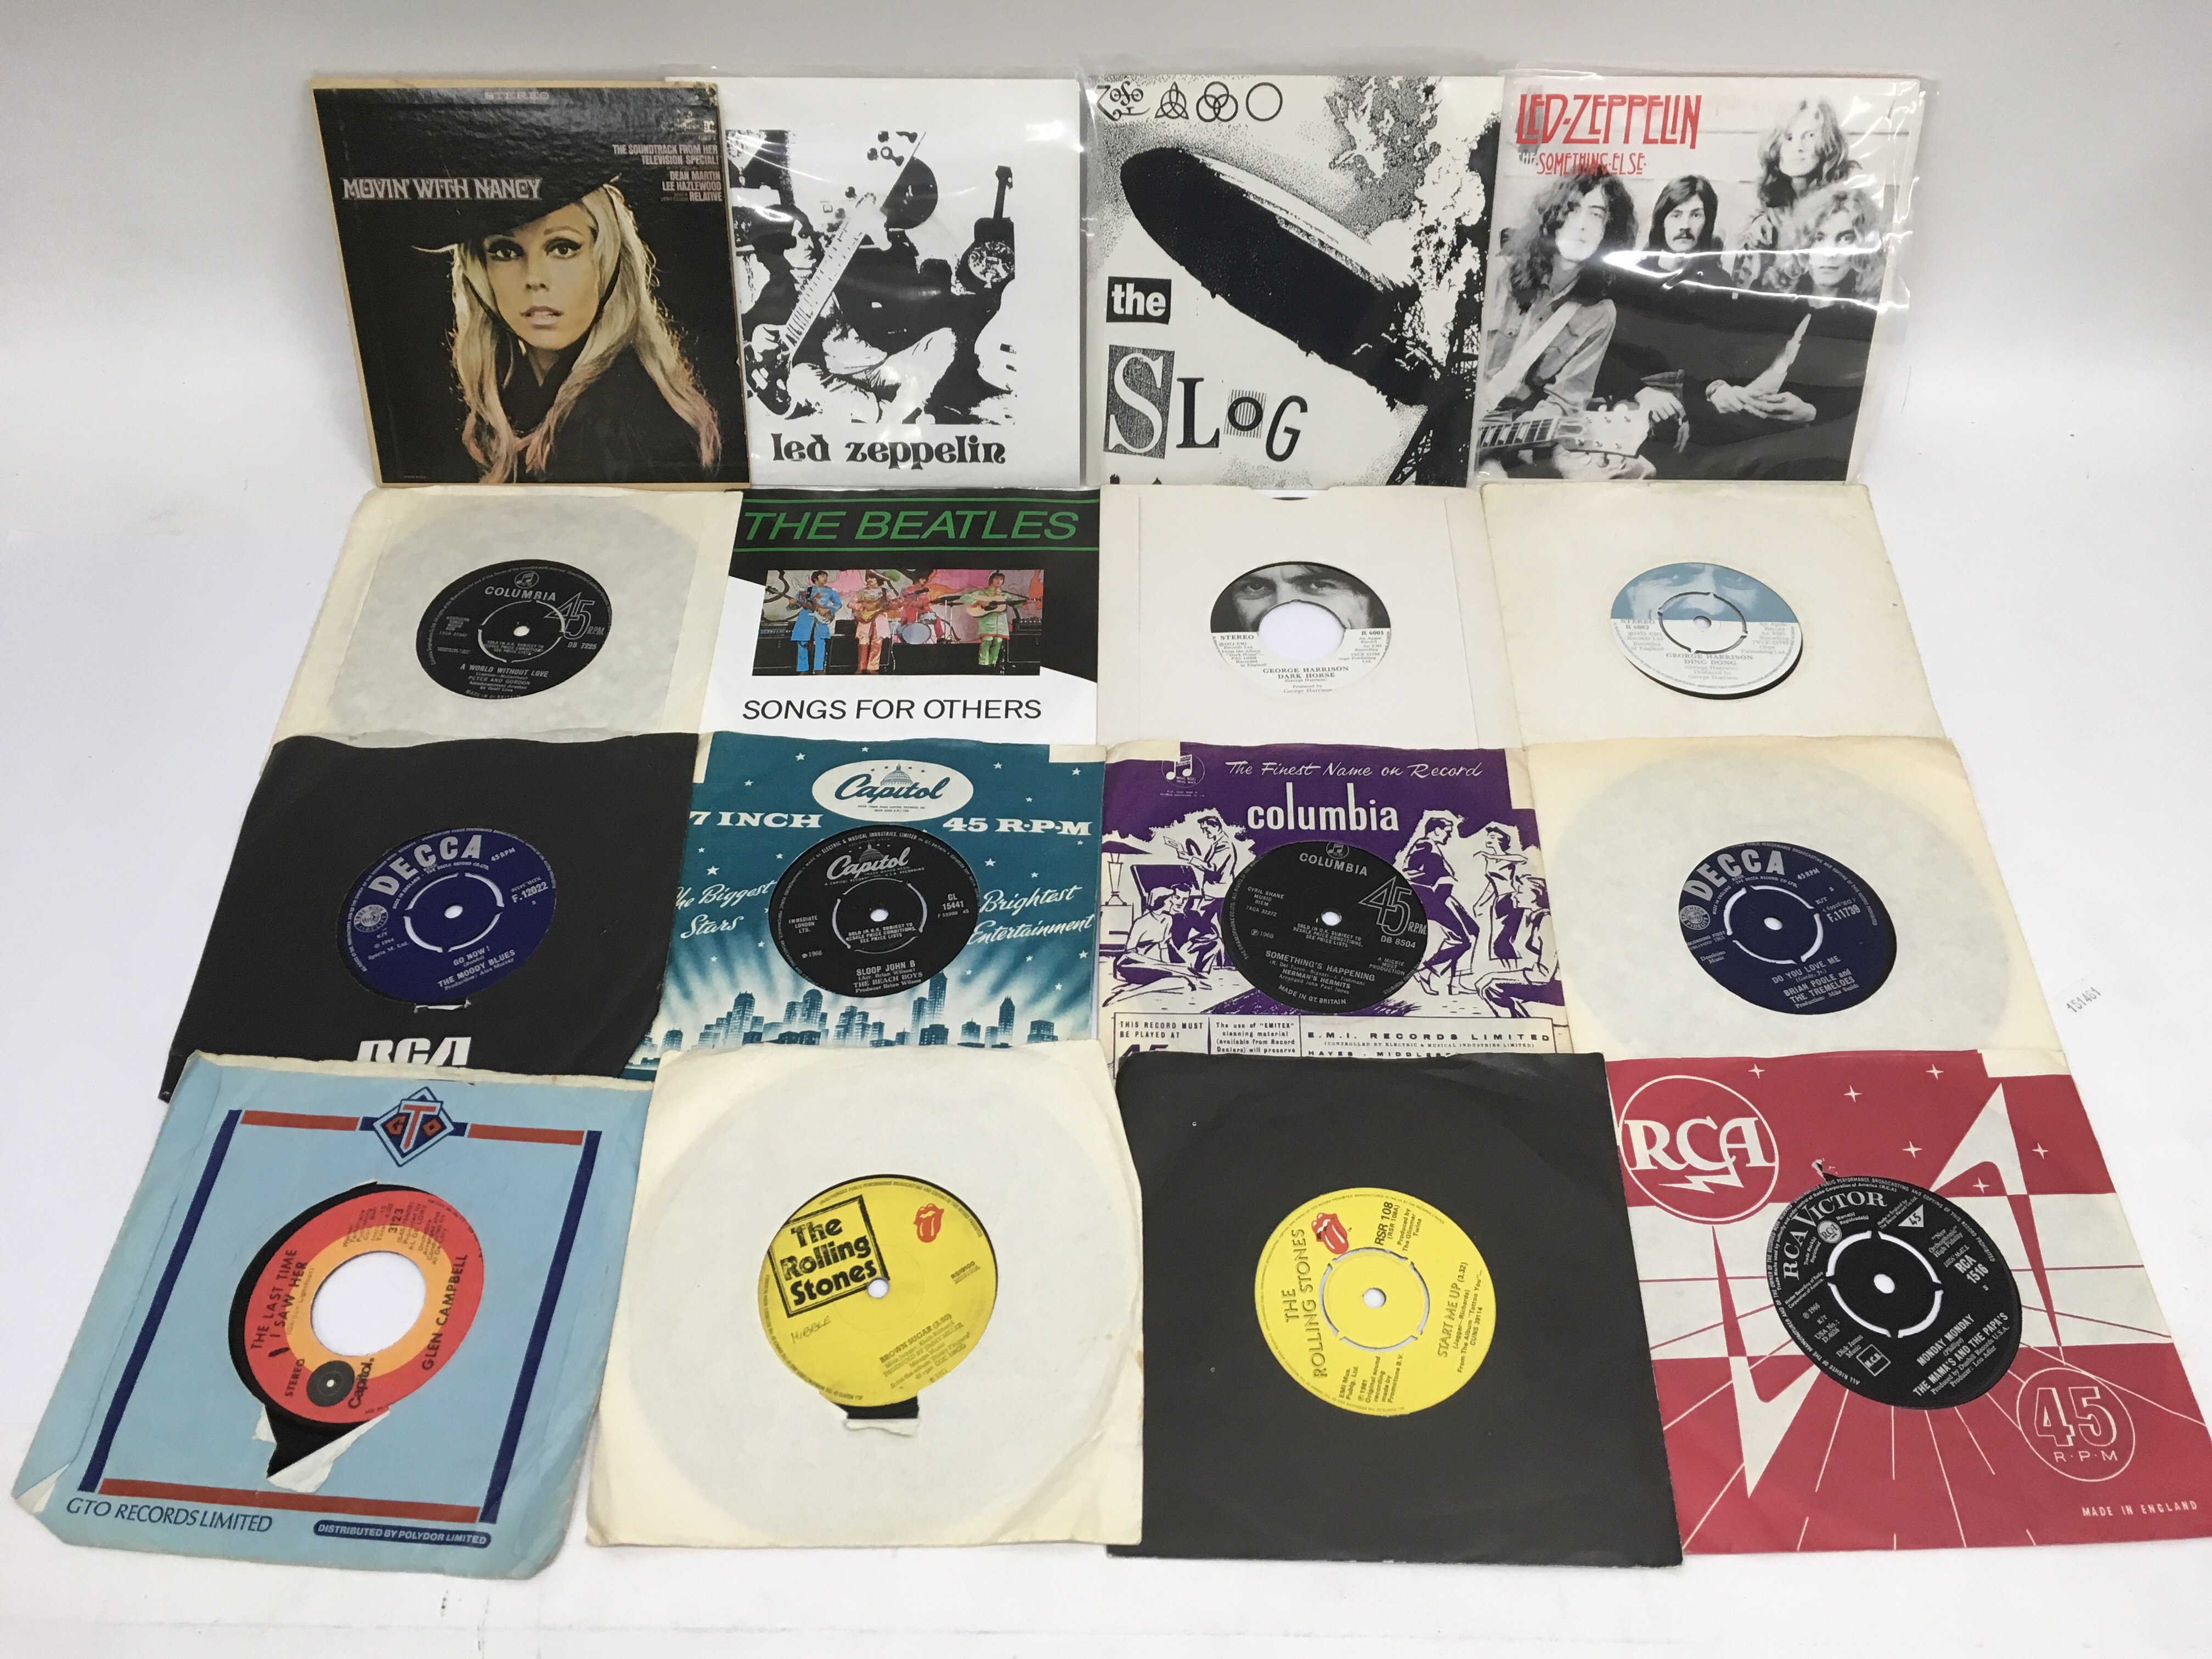 A collection of 7inch vinyl singles by various art